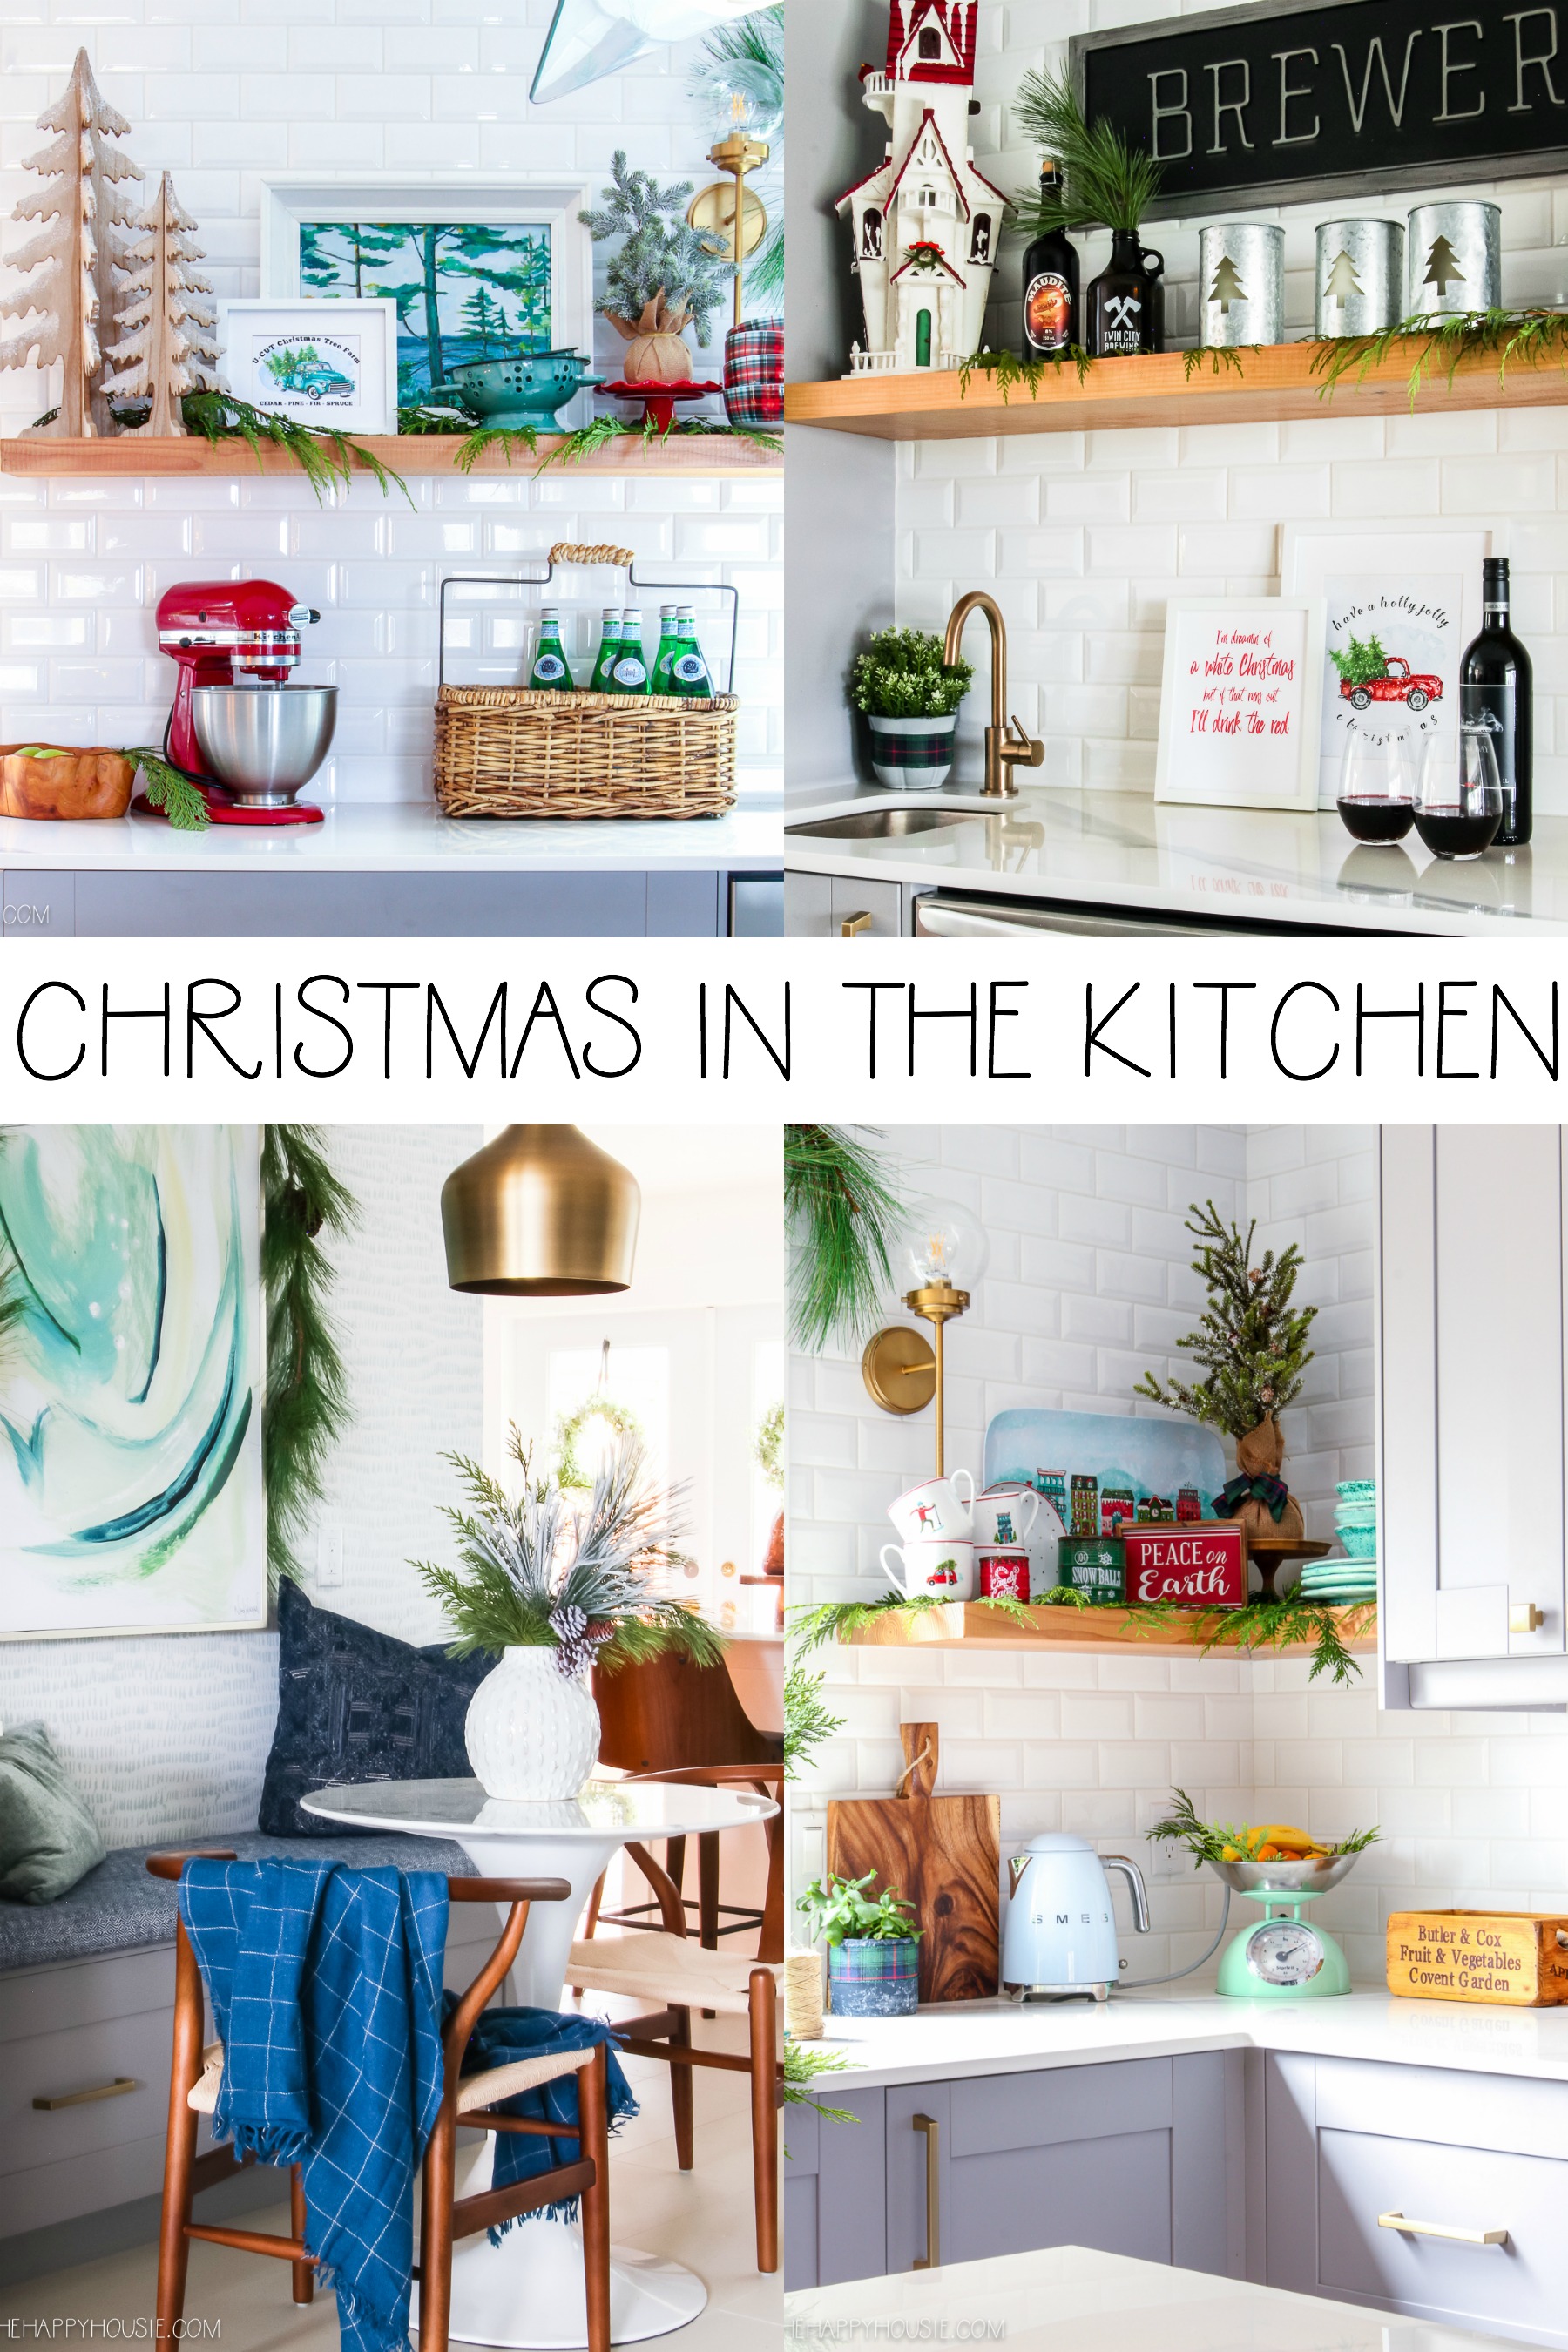 Christmas in the kitchen poster.